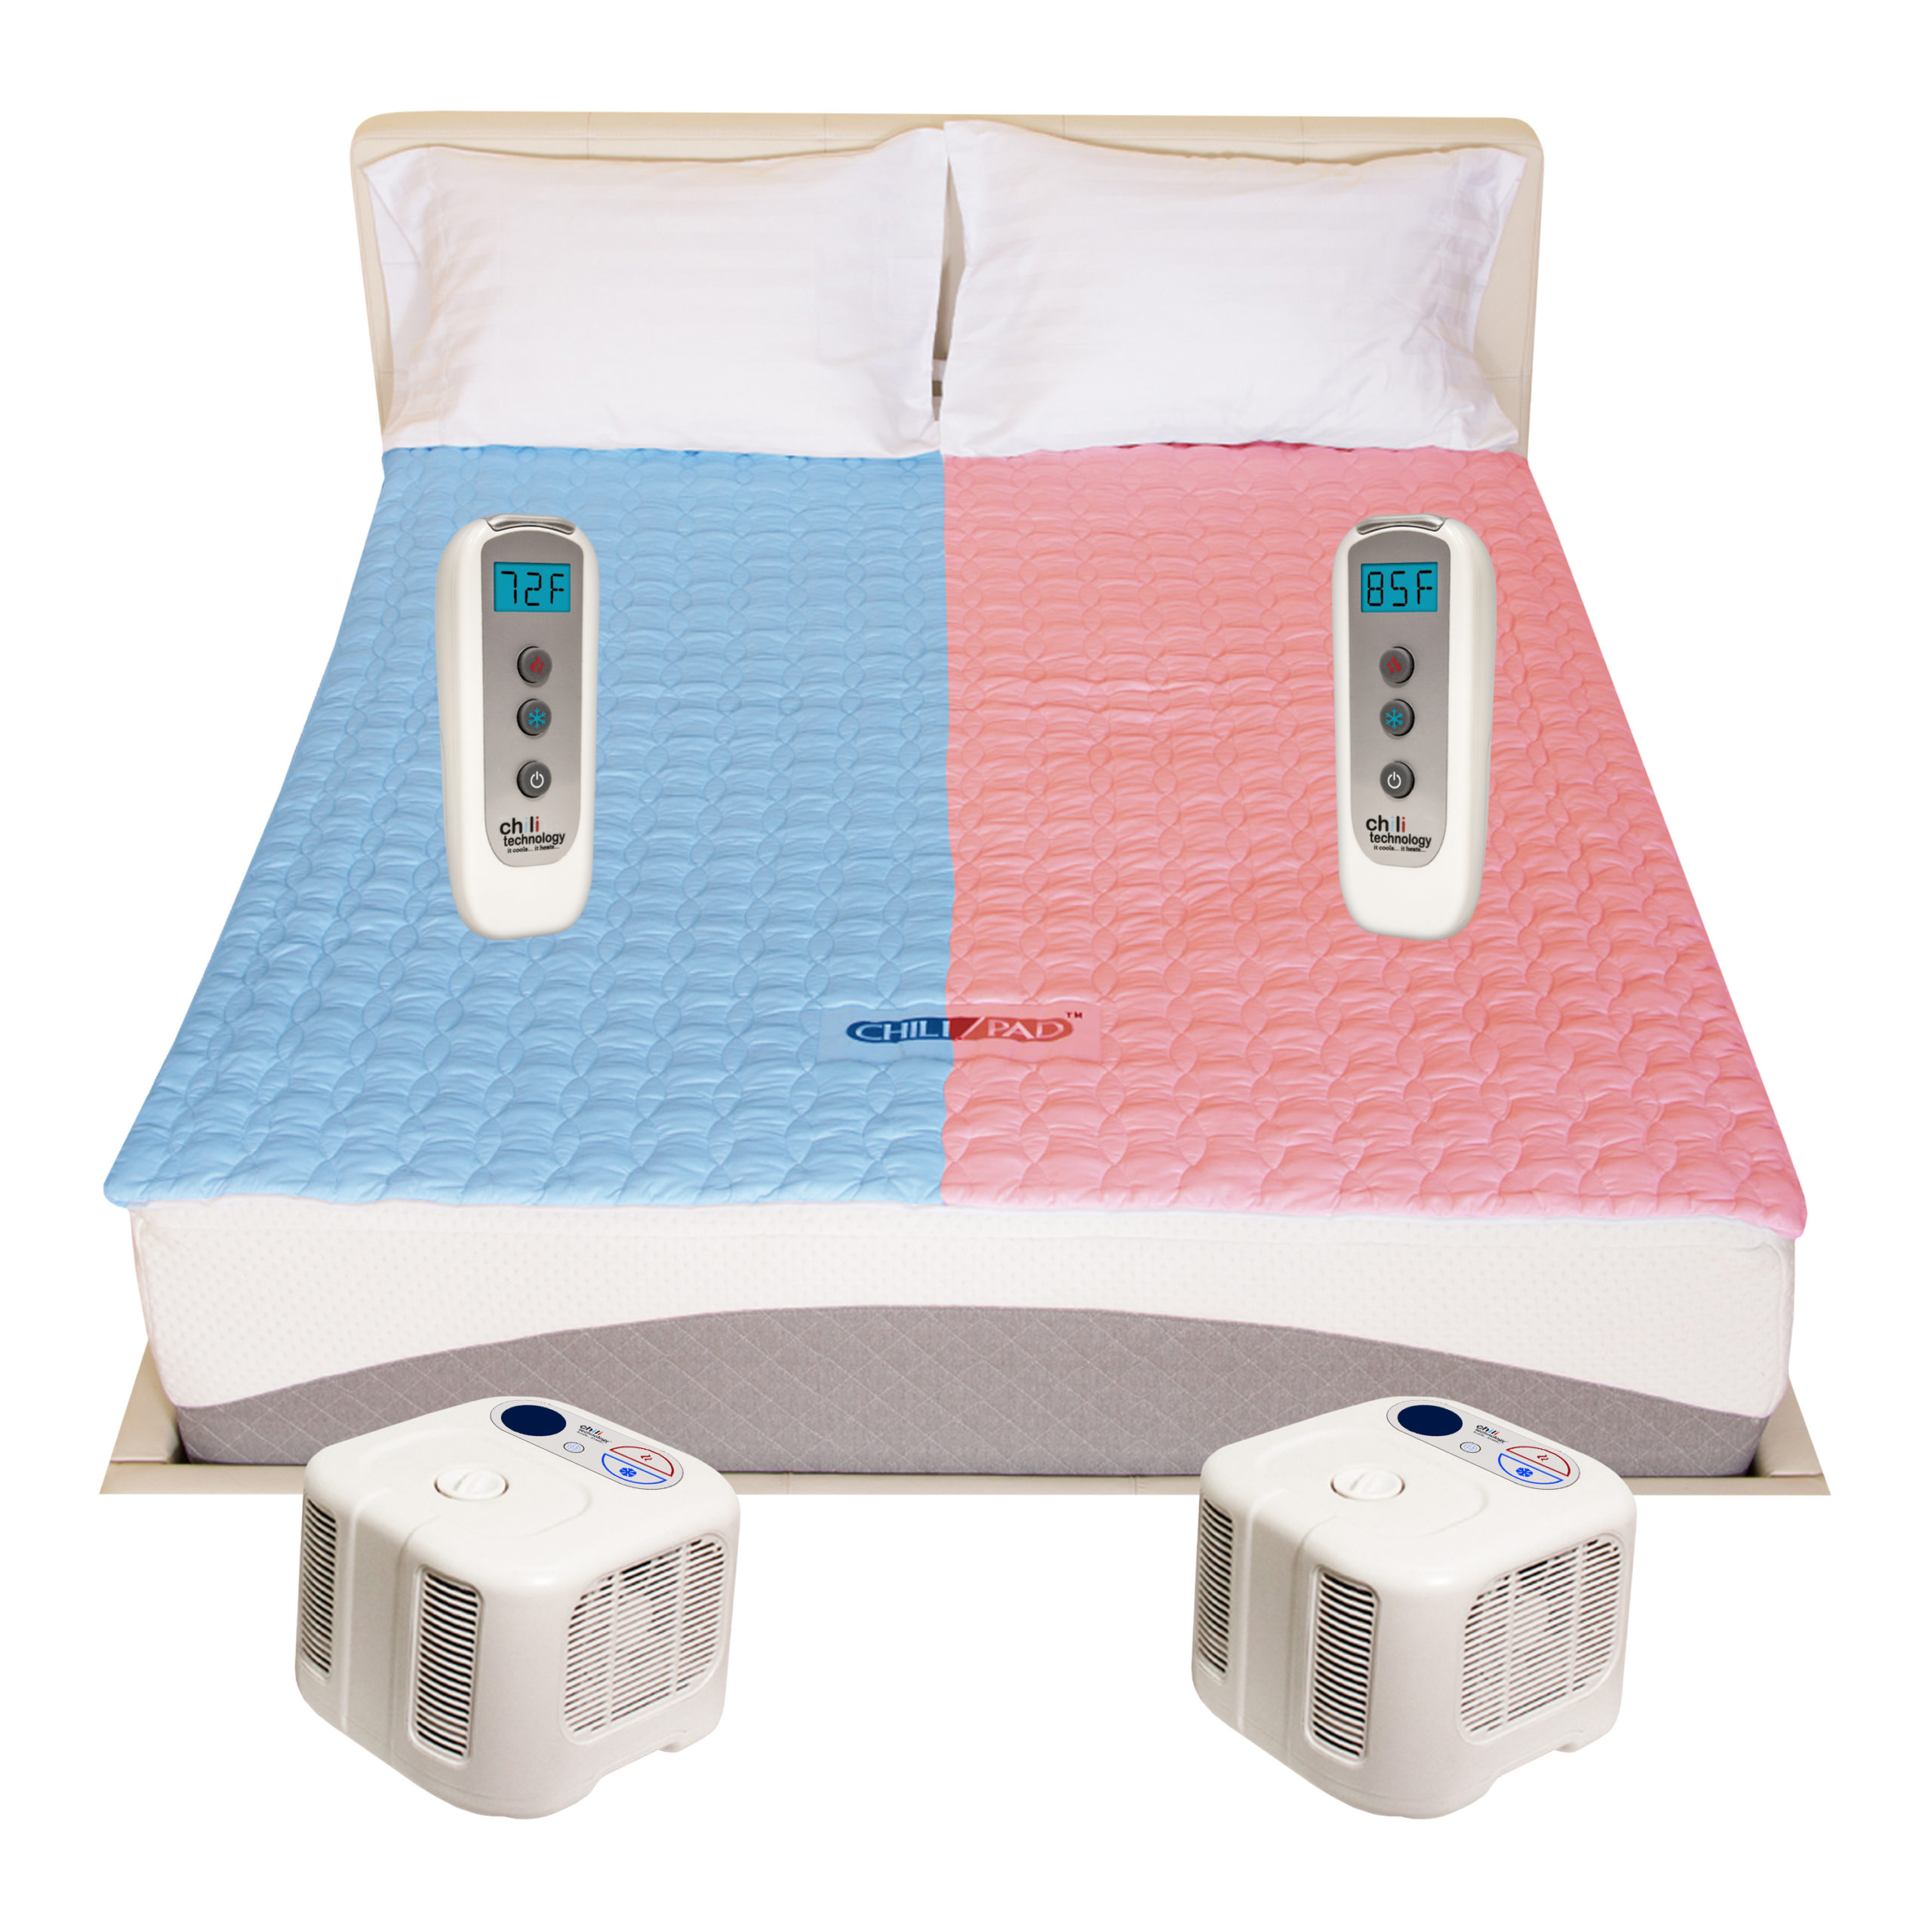 Can a Heating Pad Make You Have a Fever - Chilipad|Temperature|Mattress|Cube|Sleep|Bed|Water|System|Pad|Ooler|Control|Unit|Night|Bedjet|Technology|Side|Air|Product|Review|Body|Time|Degrees|Noise|Price|Pod|Tubes|Heat|Device|Cooling|Room|King|App|Features|Size|Cover|Sleepers|Sheets|Energy|Warranty|Quality|Mattress Pad|Control Unit|Cube Sleep System|Sleep Pod|Distilled Water|Remote Control|Sleep System|Desired Temperature|Water Tank|Chilipad Cube|Chili Technology|Deep Sleep|Pro Cover|Ooler Sleep System|Hydrogen Peroxide|Cool Mesh|Sleep Temperature|Fitted Sheet|Pod Pro|Sleep Quality|Smartphone App|Sleep Systems|Chilipad Sleep System|New Mattress|Sleep Trial|Full Refund|Mattress Topper|Body Heat|Air Flow|Chilipad Review